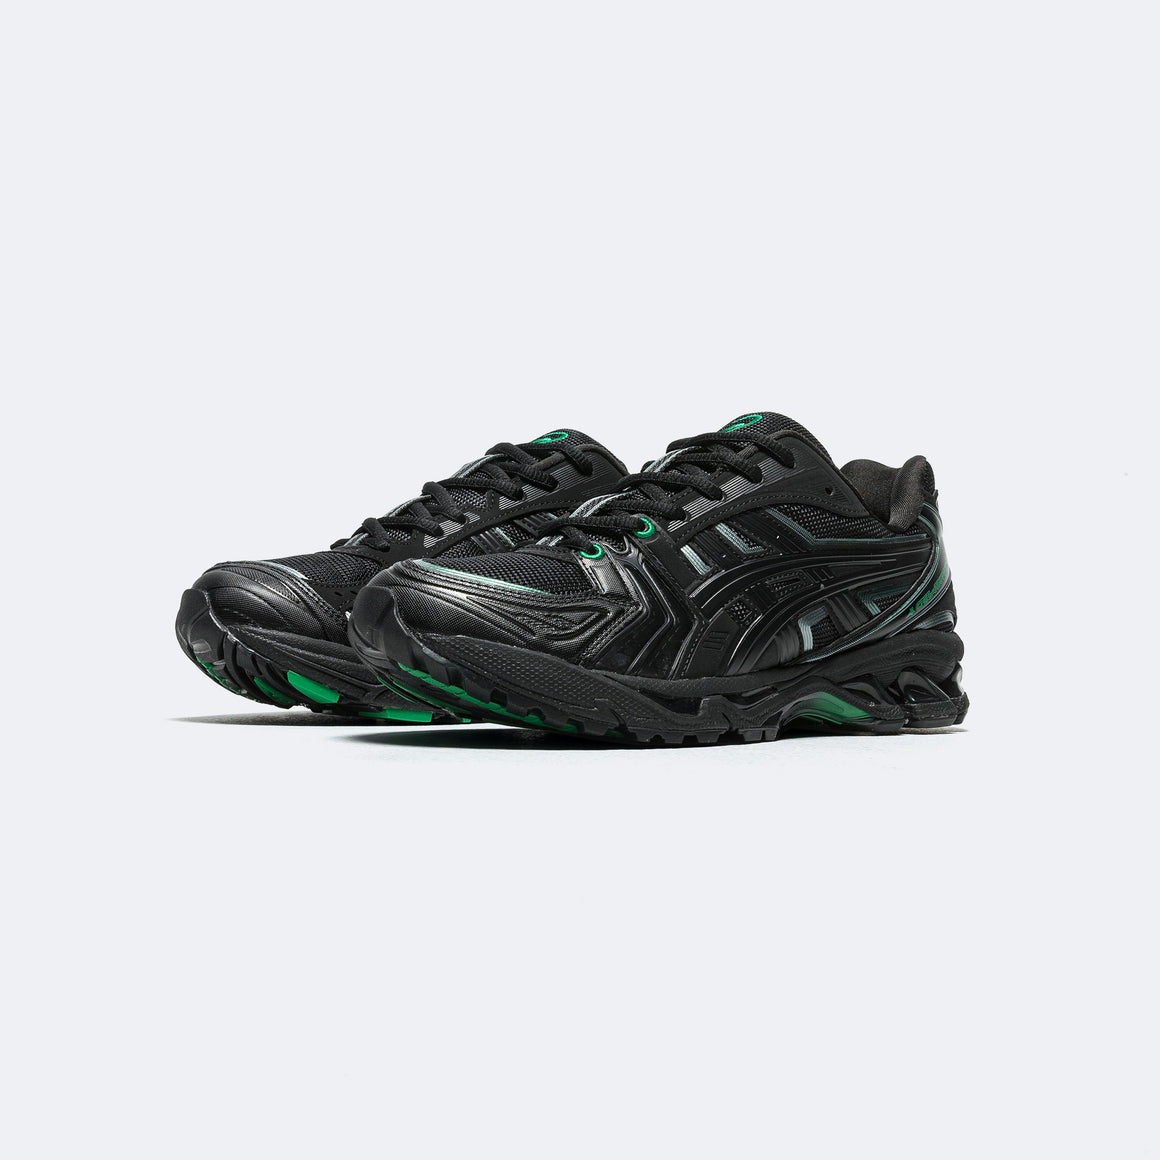 Asics - GEL-Kayano 14 by 8ON8 - Black/Black - UP THERE